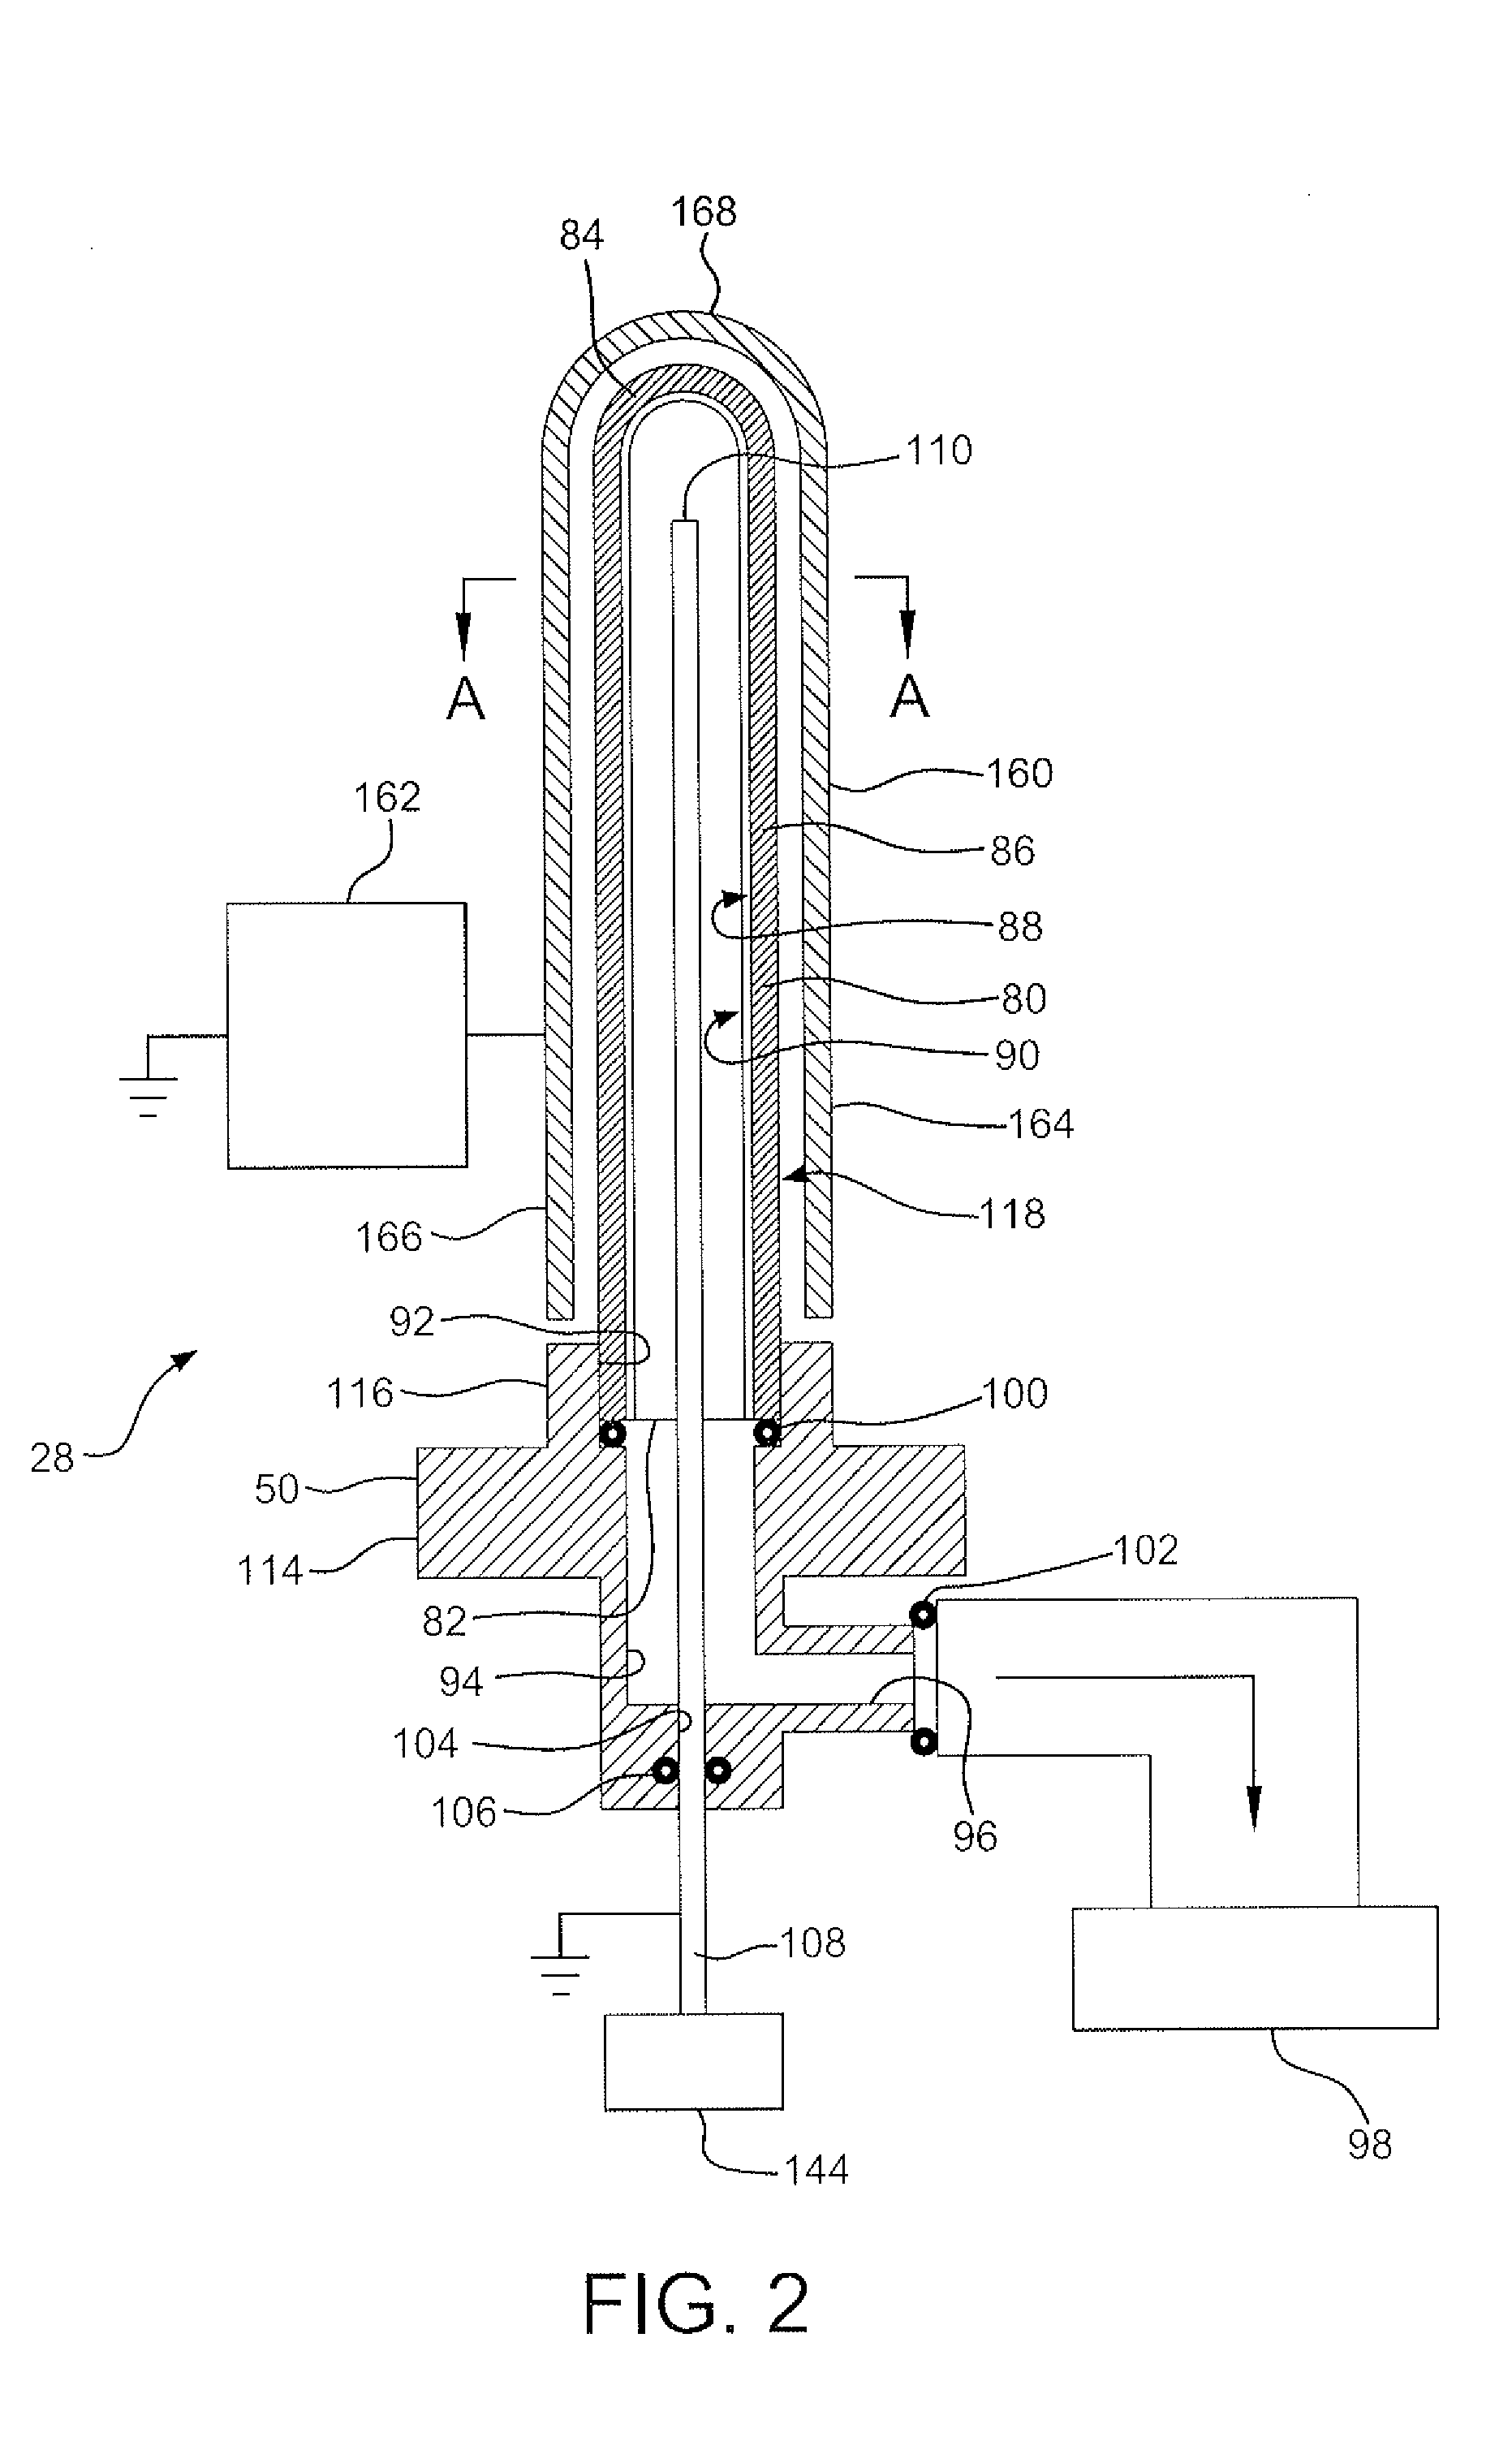 Vessel inspection apparatus and methods